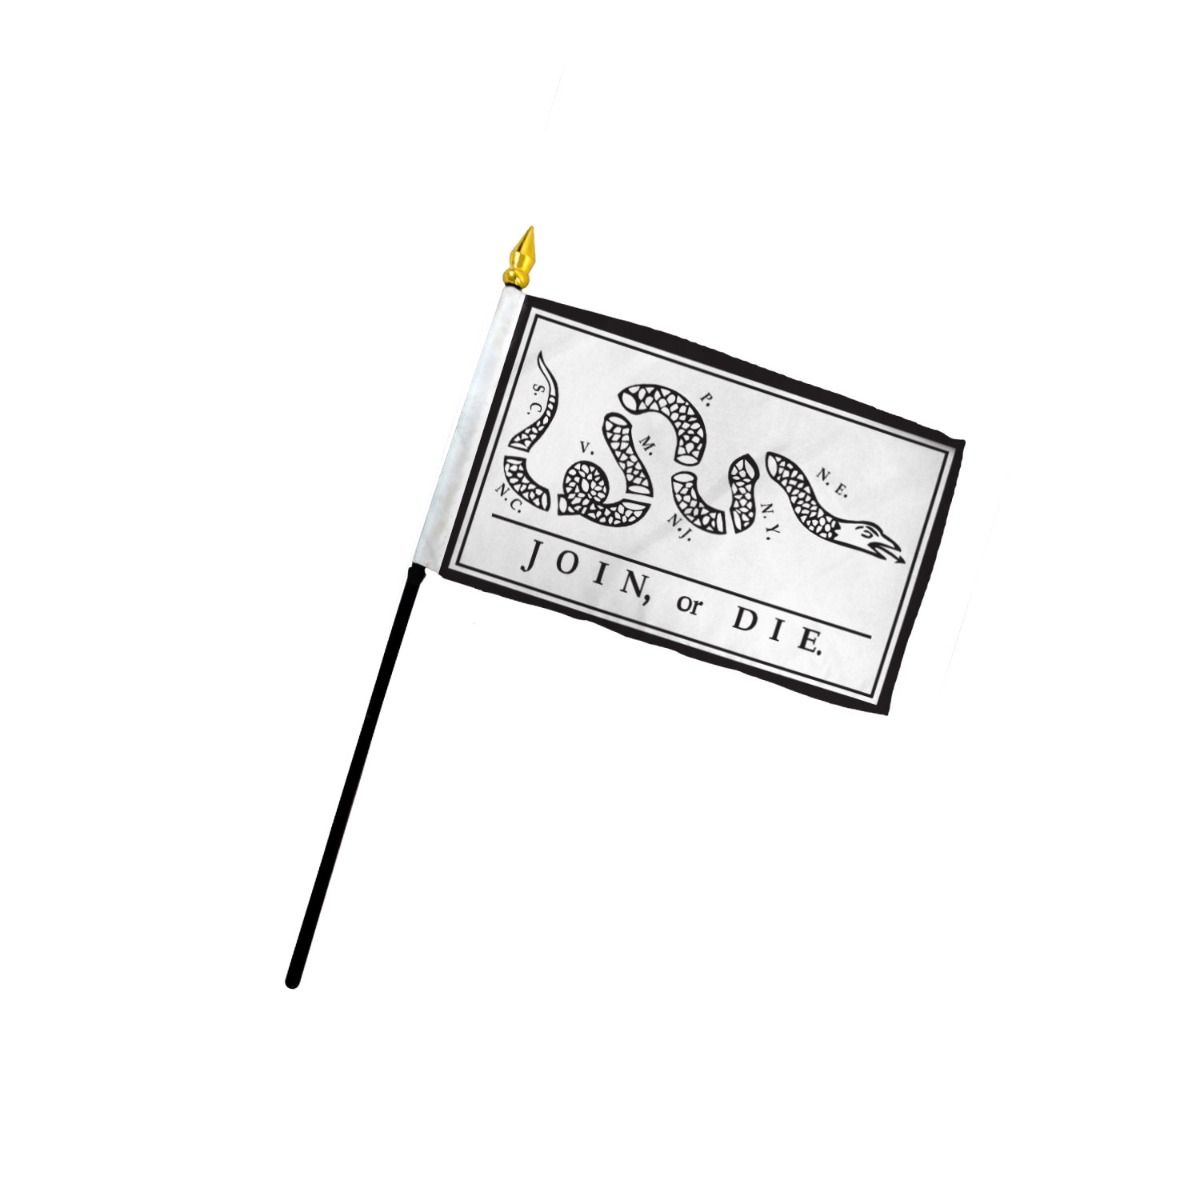 Join Or Die 4x6in Stick Flag, Flags Importer